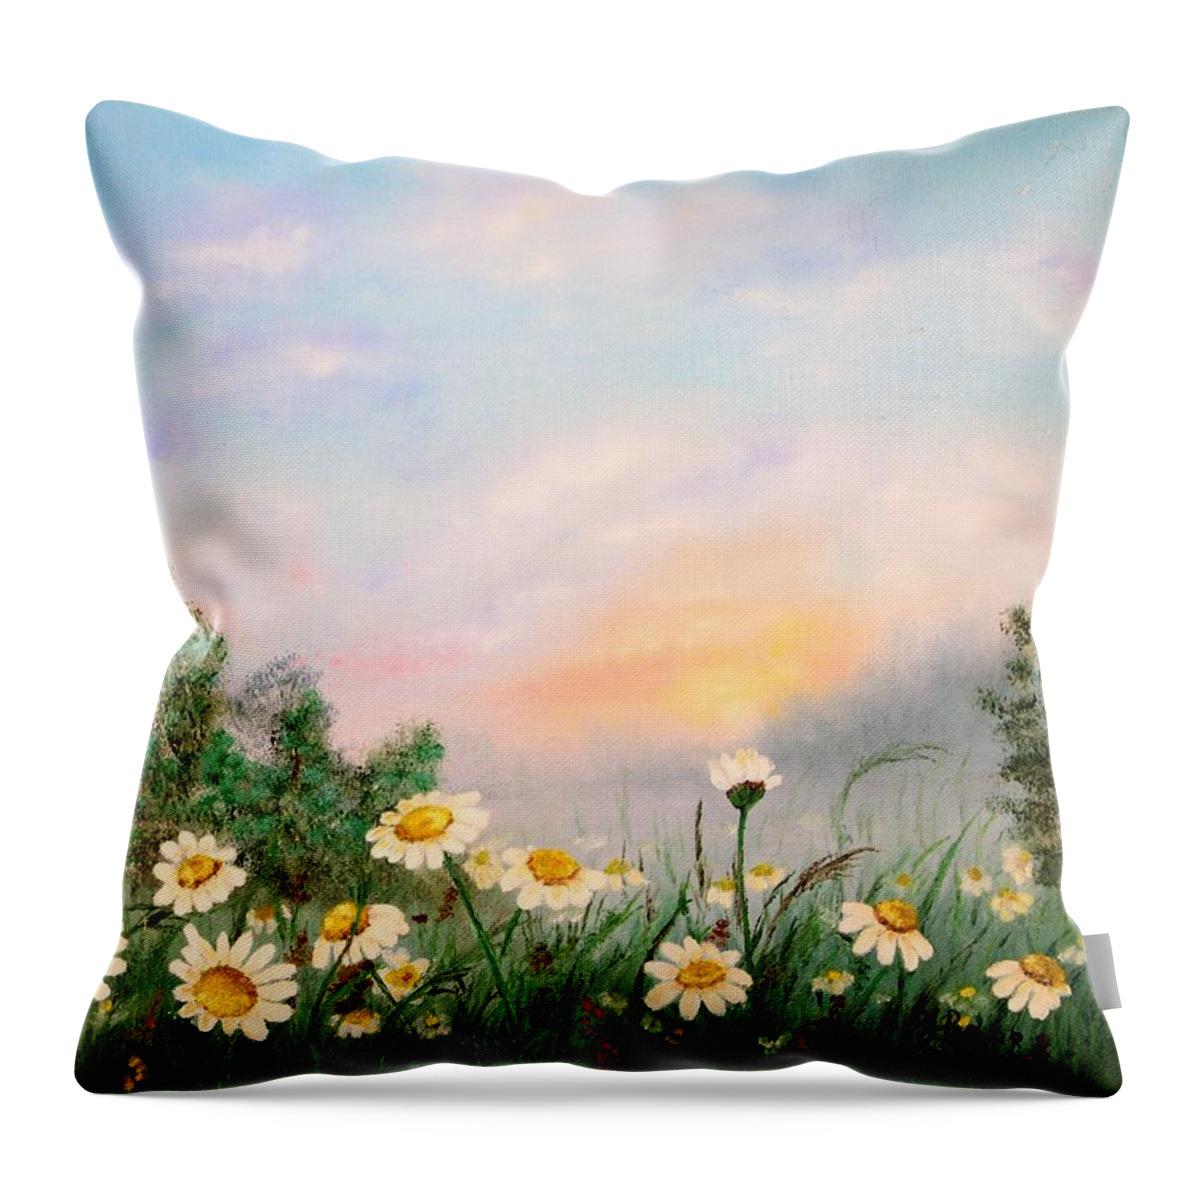 Wall Art Daisies Sunrise Landscape Small Flowers White Daisies Oil Painting Original Art Picture Wall Art Painting Art For The Living Room Office Decor Gift Idea For Him Throw Pillow featuring the painting Daisies by Tanya Harr